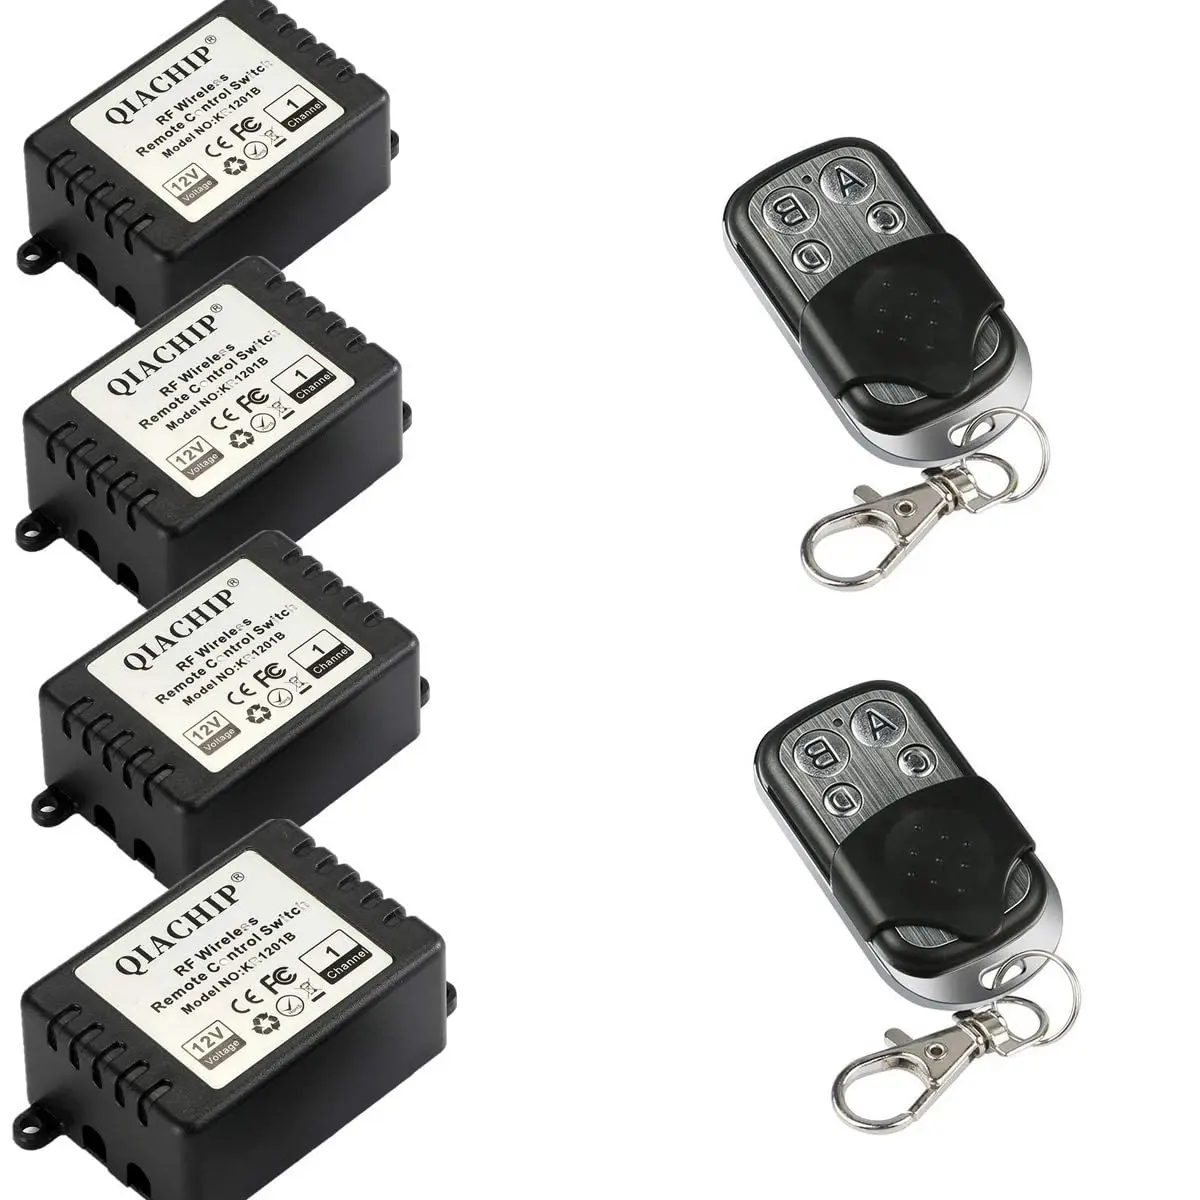 

DC 12V 1CH 433Mhz RF Wireless Relay Remote Control Light Momentary Switch Transmitter with Receiver 4 Relays